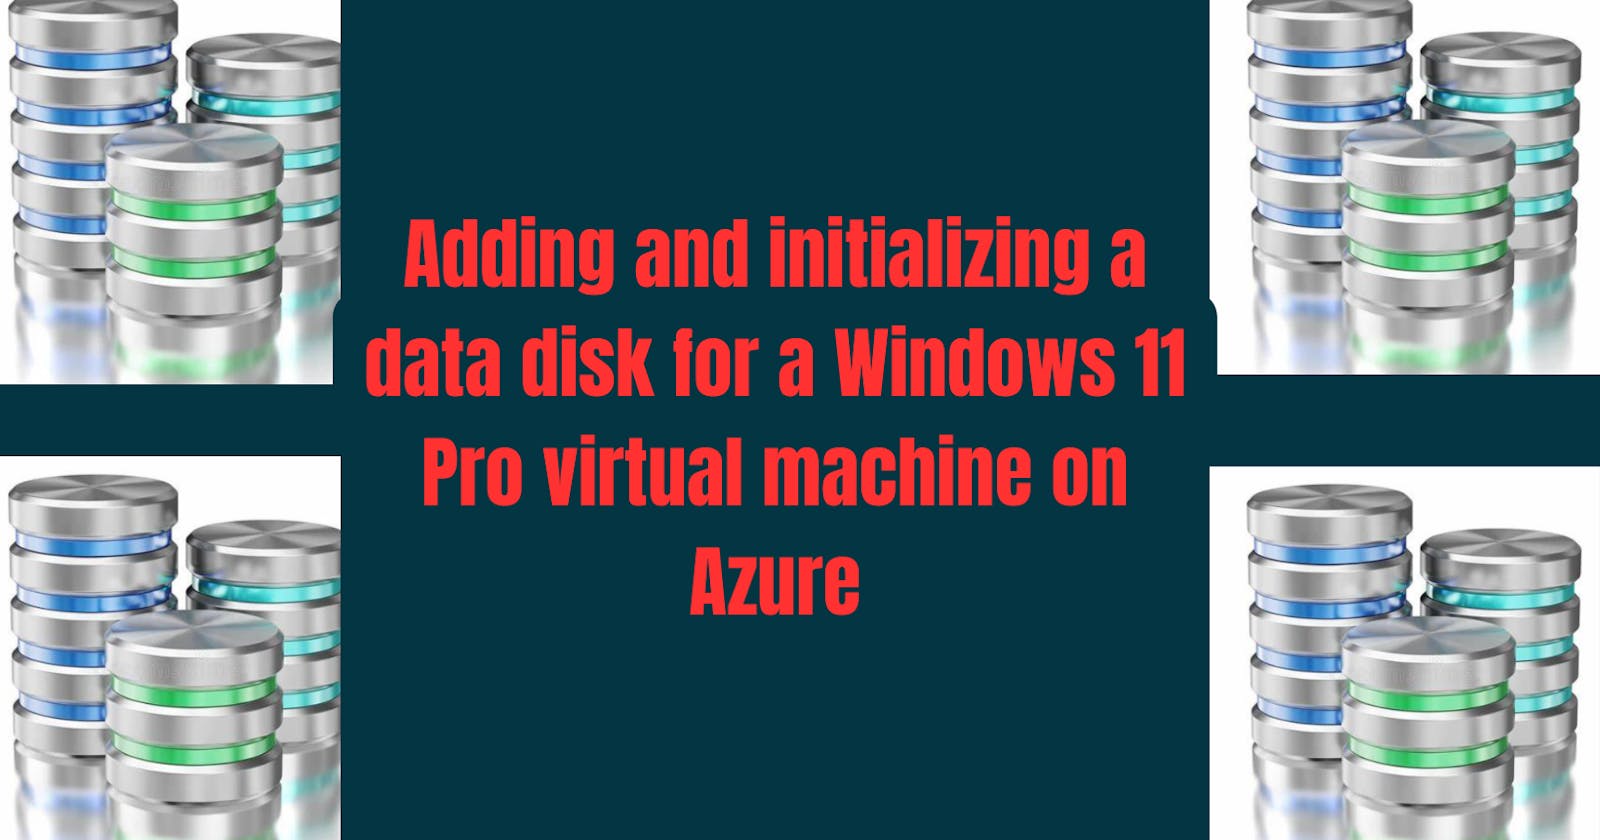 Adding and initializing a data disk for a Windows 11 Pro virtual machine on Azure